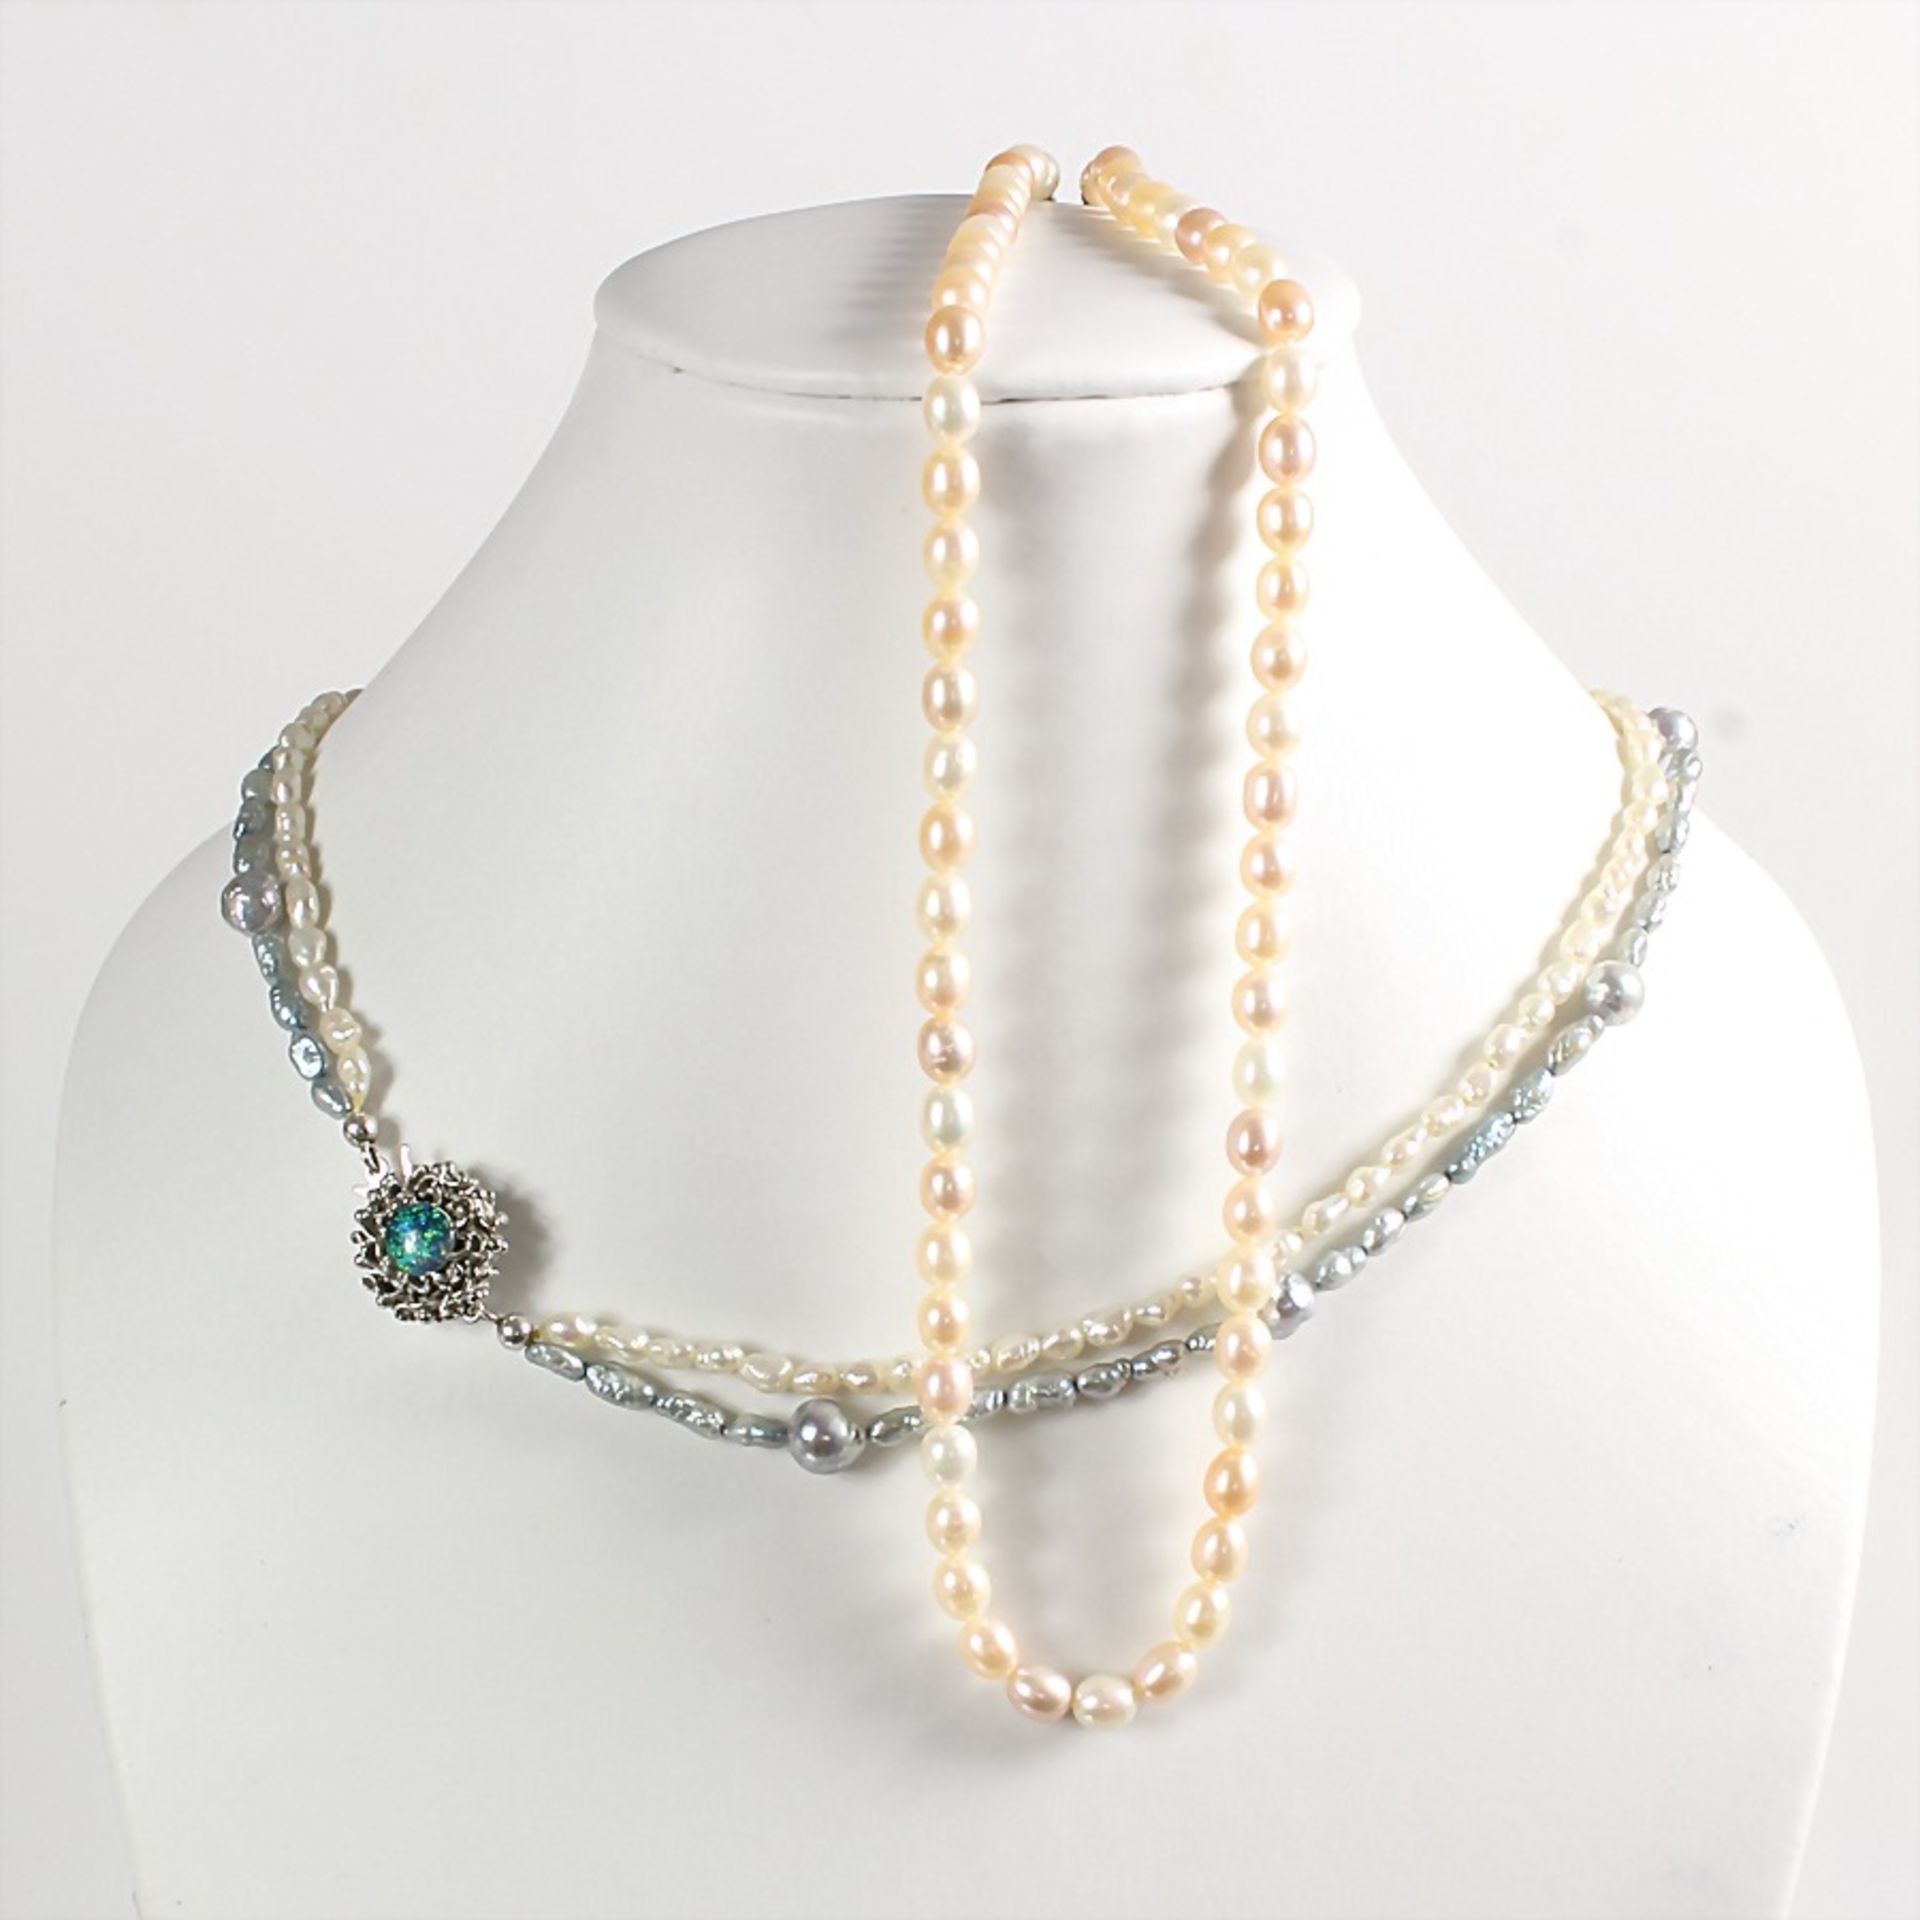 lot freshwater pearls chains, 1 chain, silver clasp, lenght = 42.5 cm, 1 chain (in two rows), clasp,